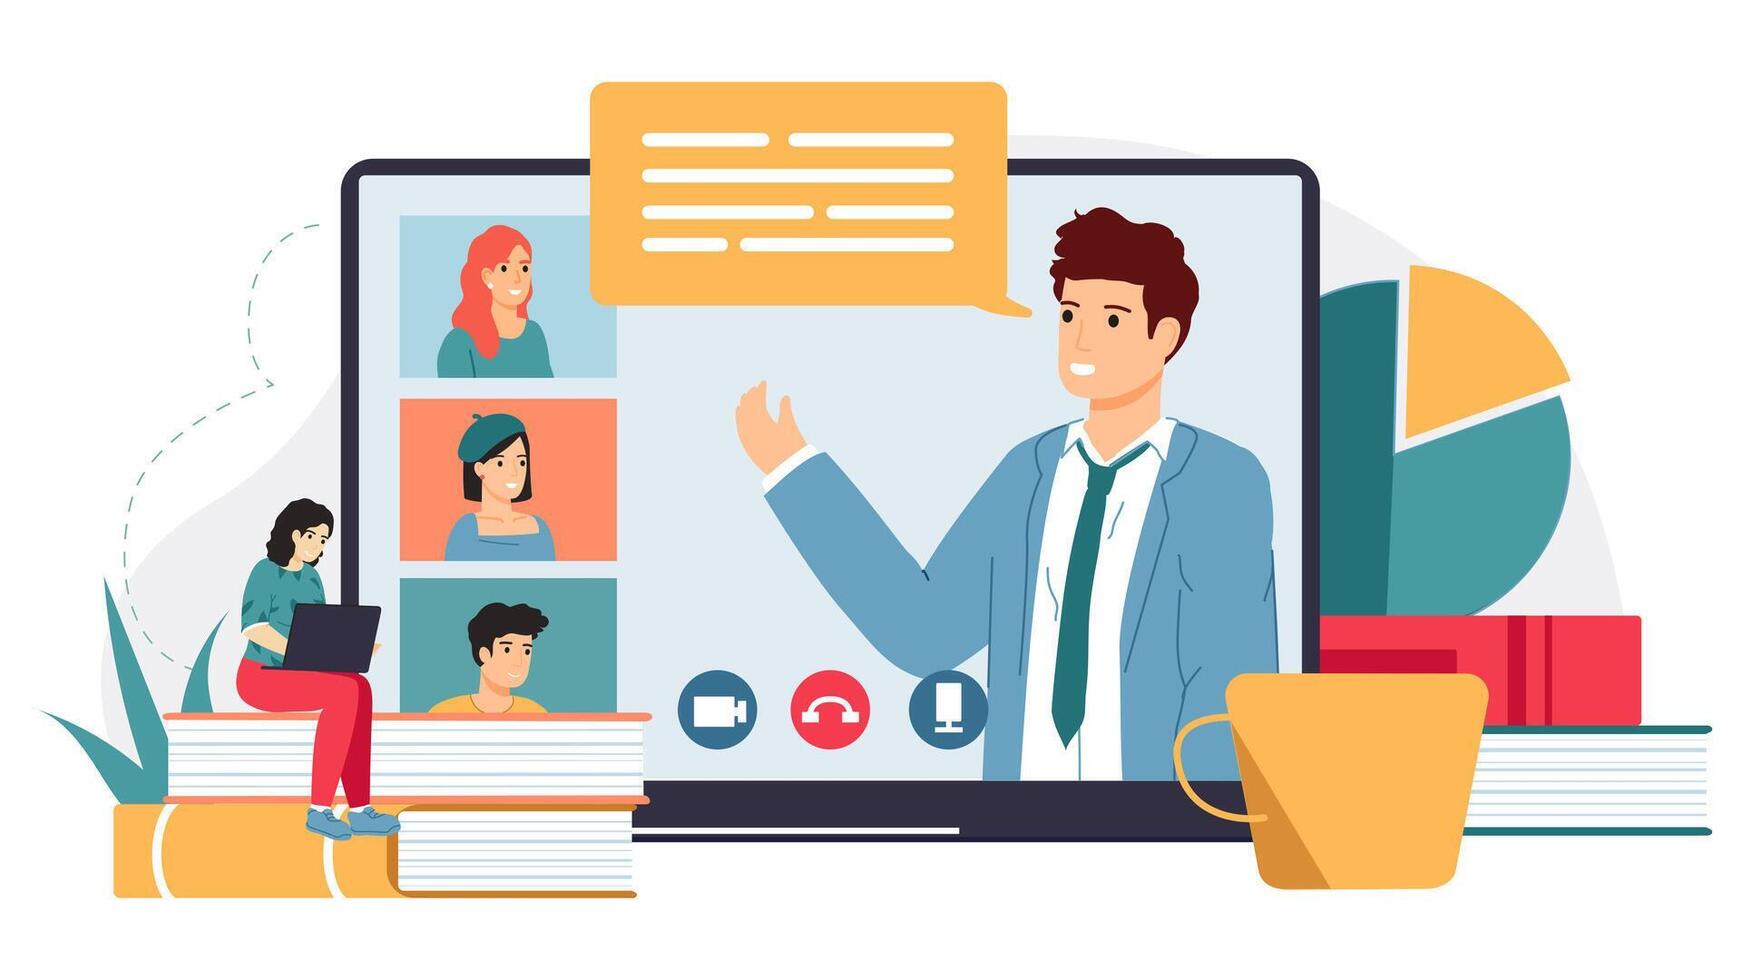 Online conference. Distance education, web courses or business meeting with manager, online distance education characters vector illustration